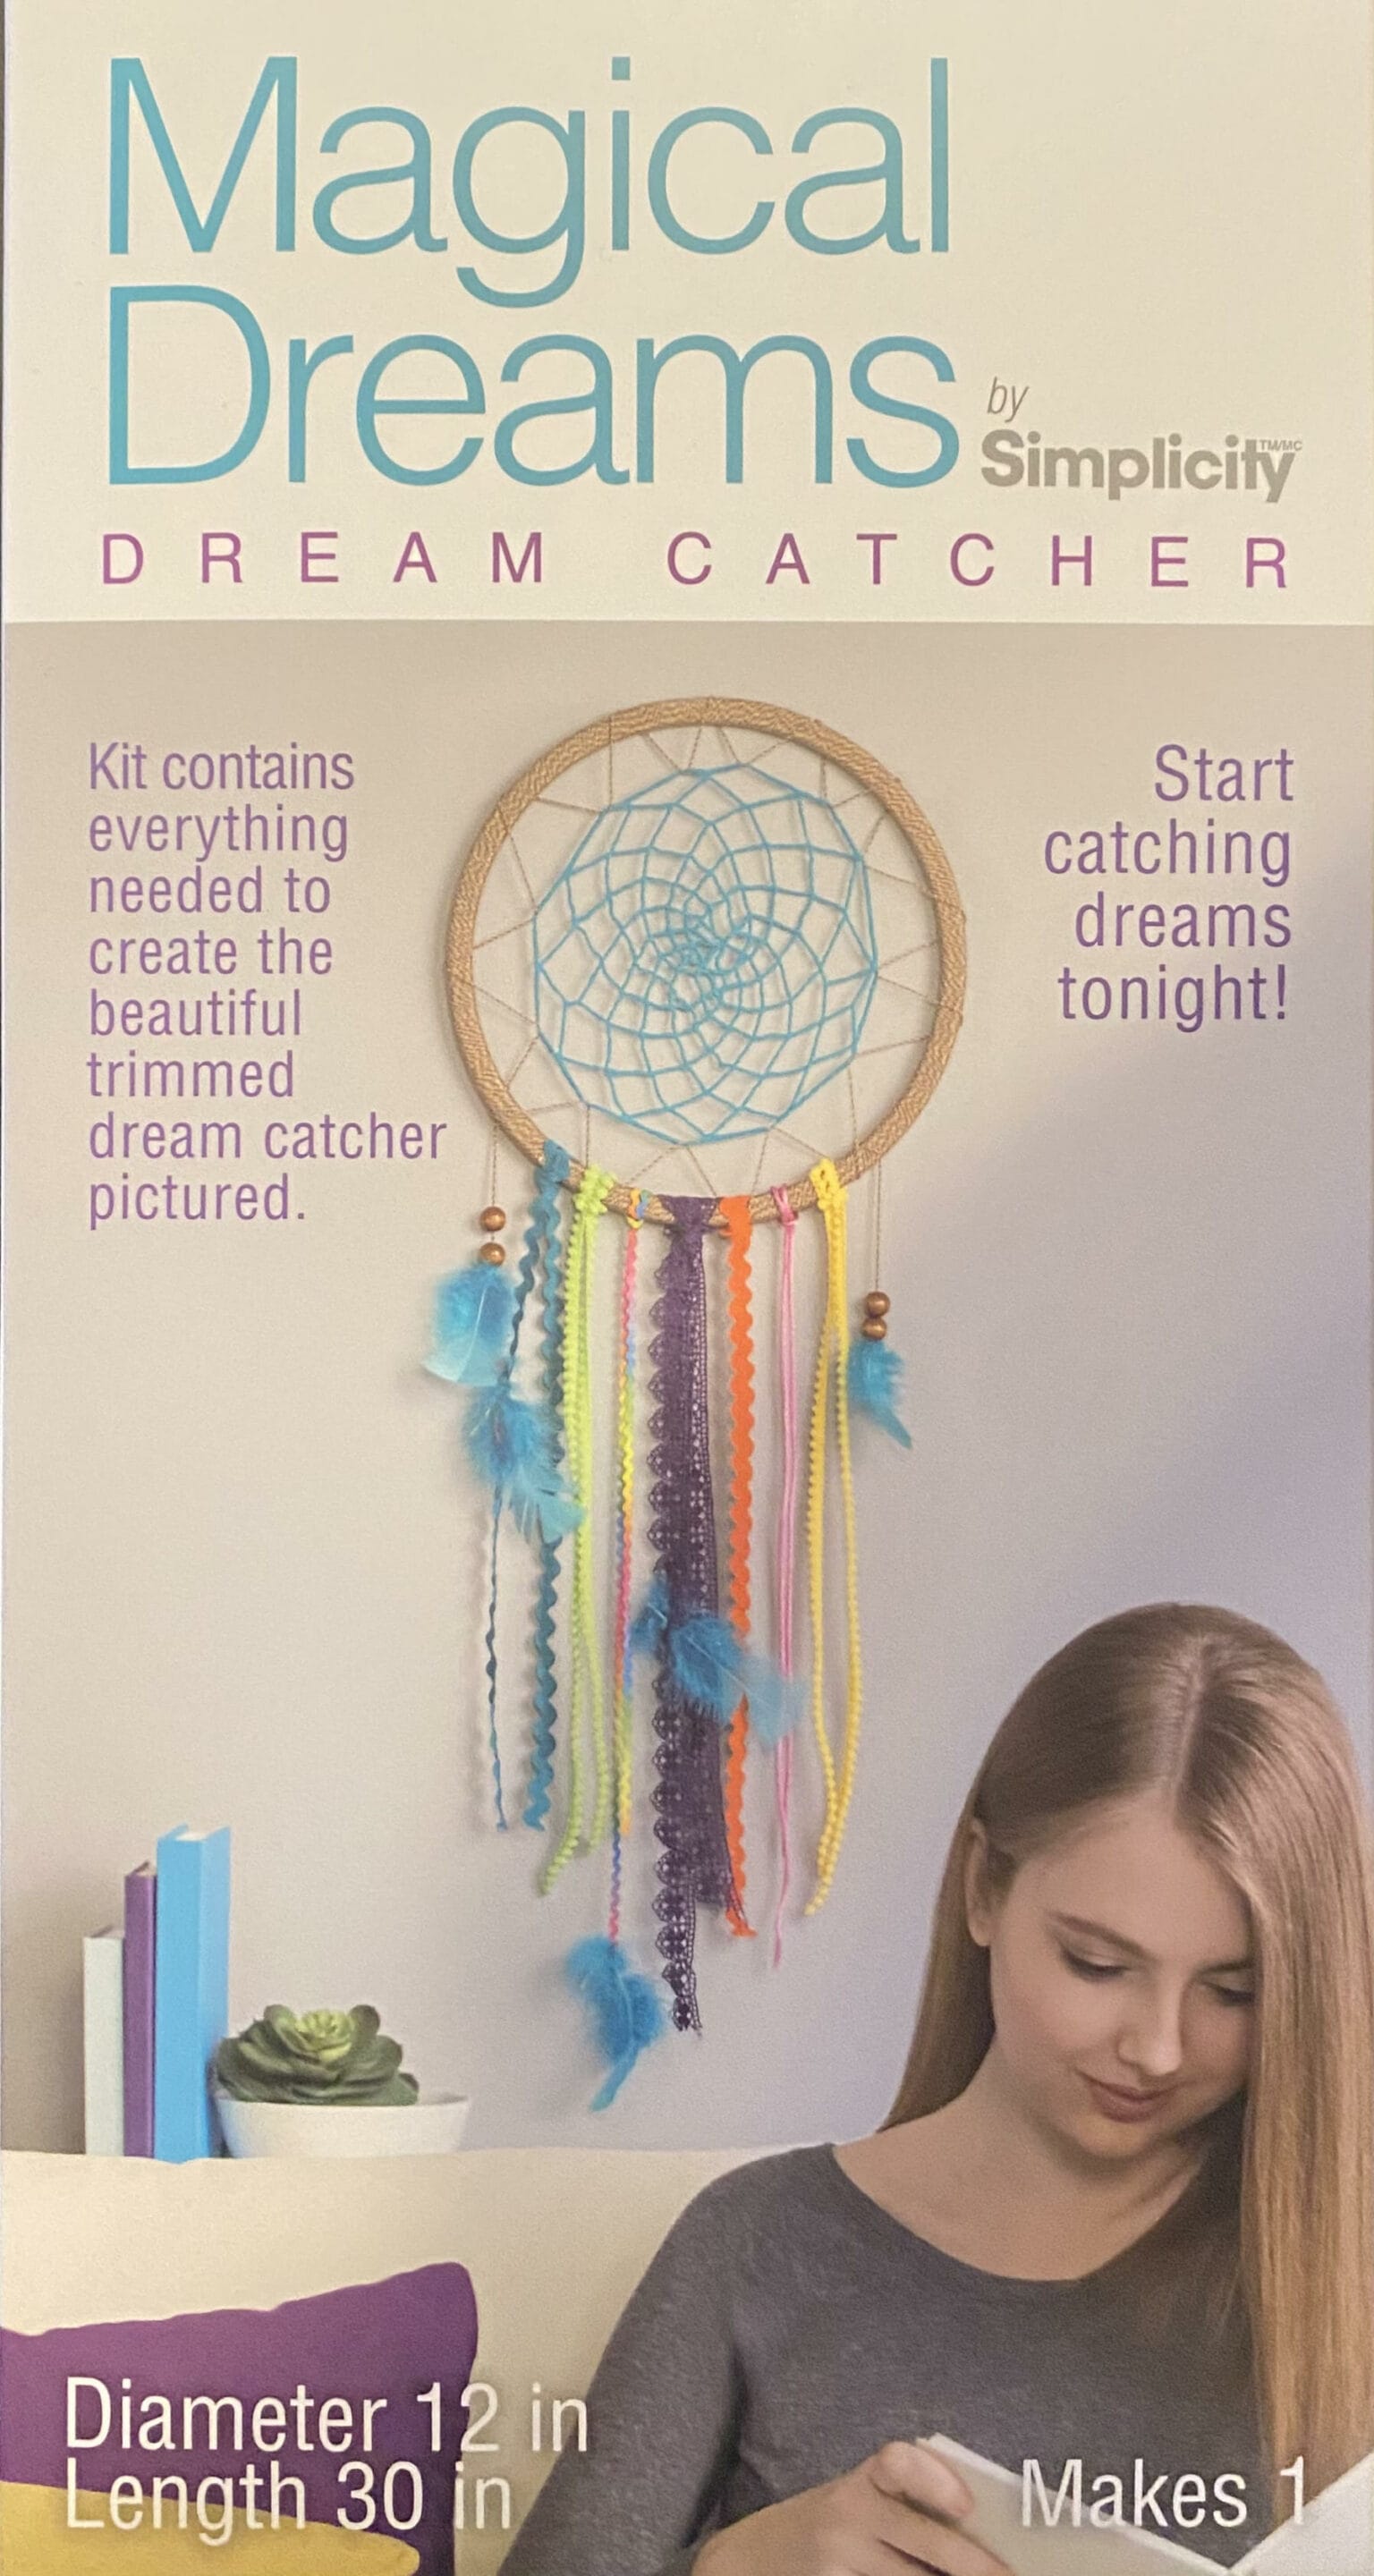 Magical Dreams Dream Catcher: Kit Contains Everything Needed to Create a  Beautifully Trimmed Dream Catcher